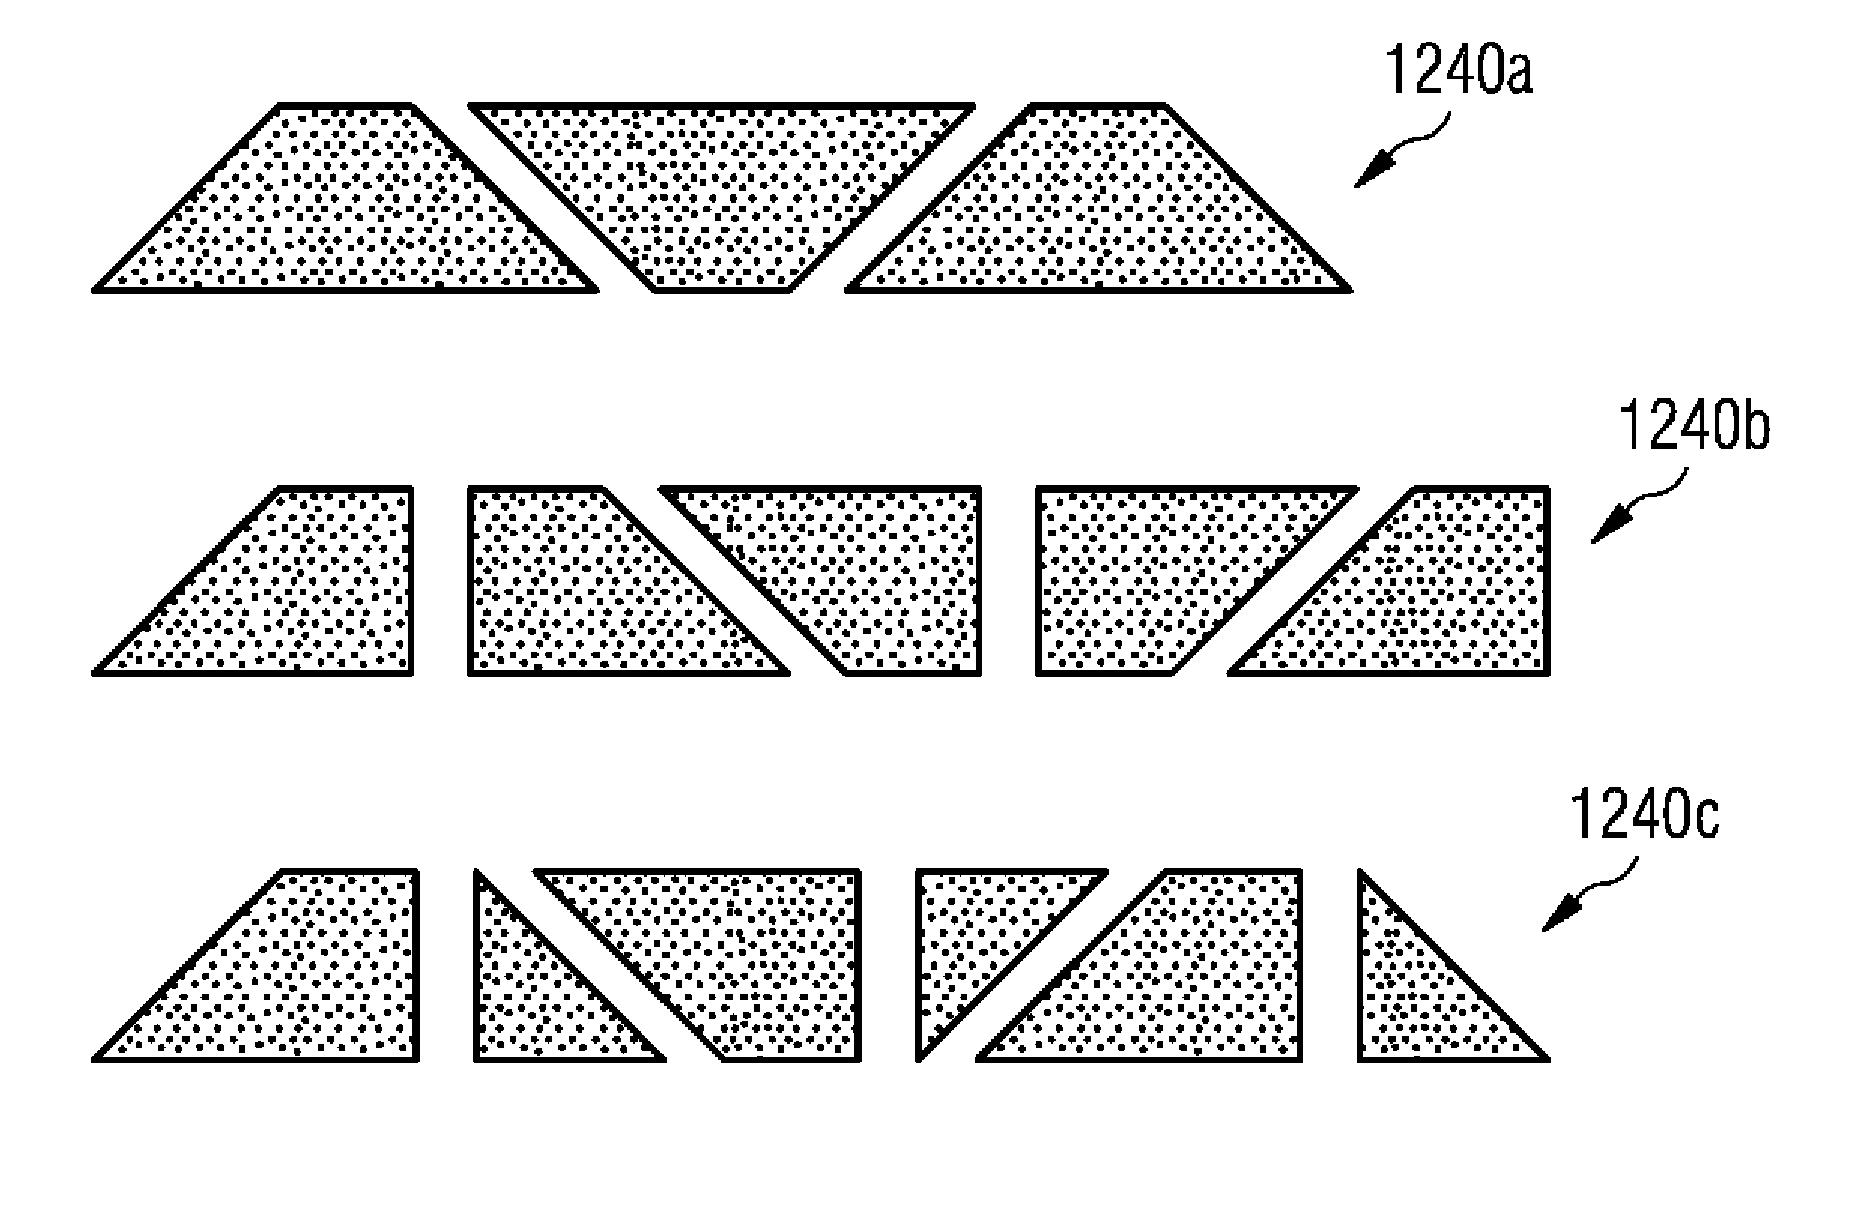 Formation of a core structure of a wind turbine rotor blade by using a plurality of basic core components